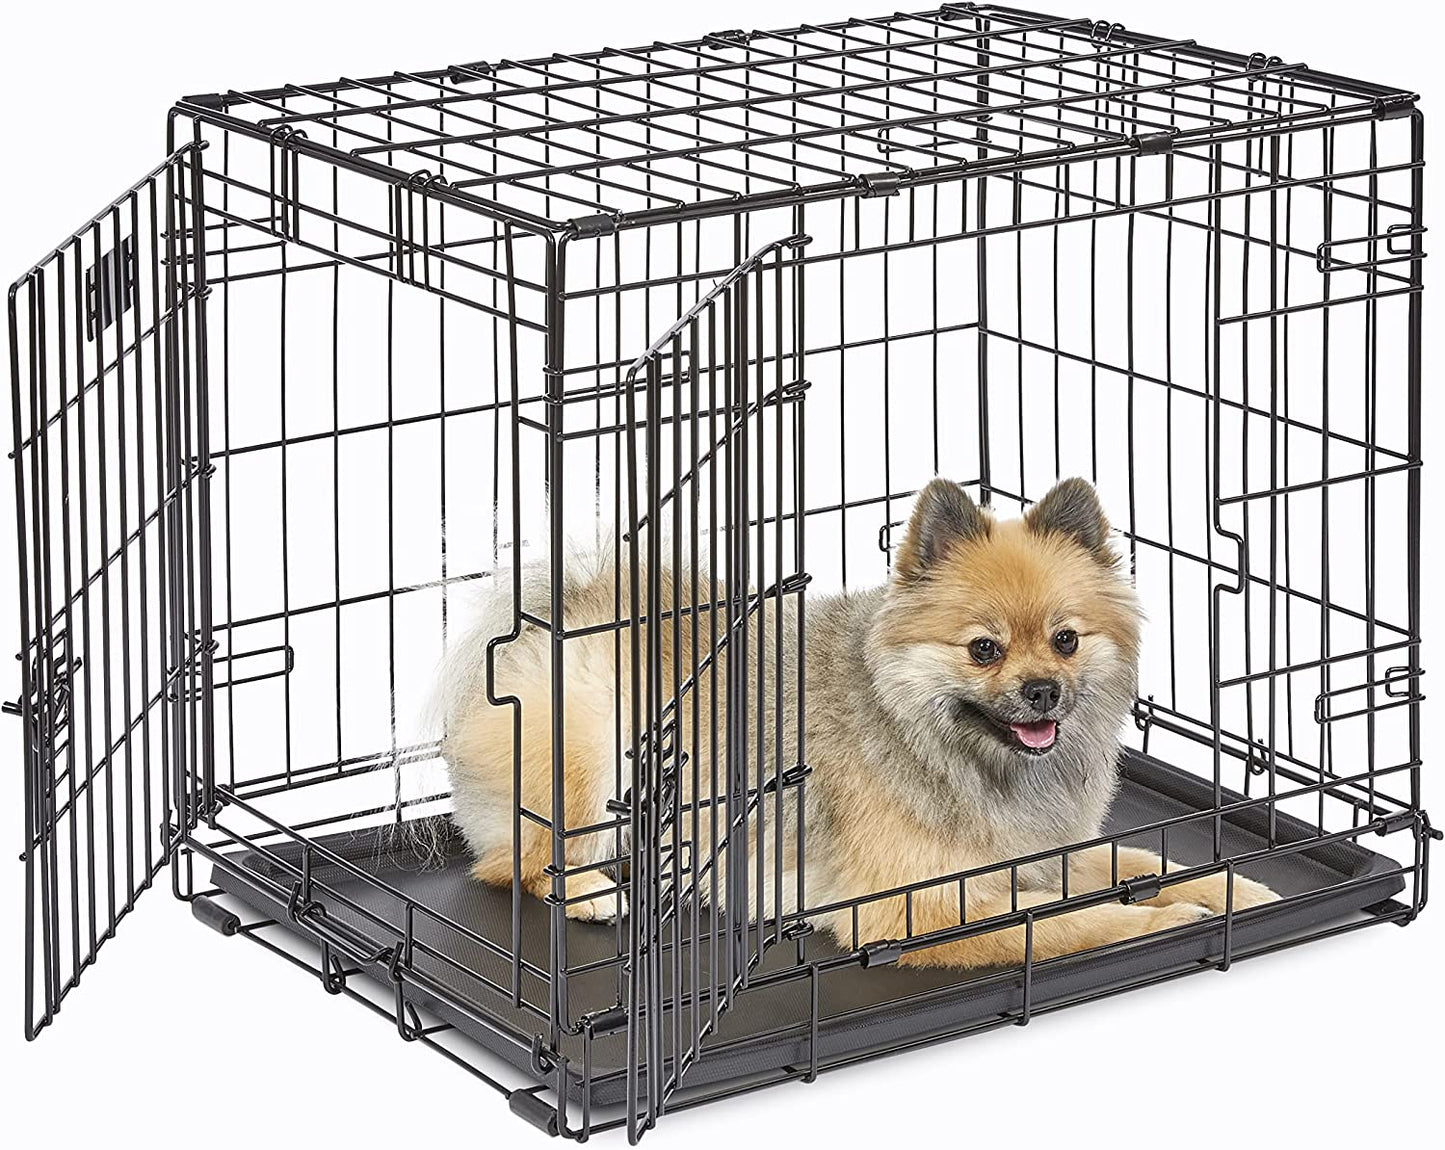 MidWest Homes for Pets Newly Enhanced Single & Double Door iCrate Dog Crate, Includes Leak-Proof Pan, Floor Protecting Feet, Divider Panel & 24 inch with Divider, double door